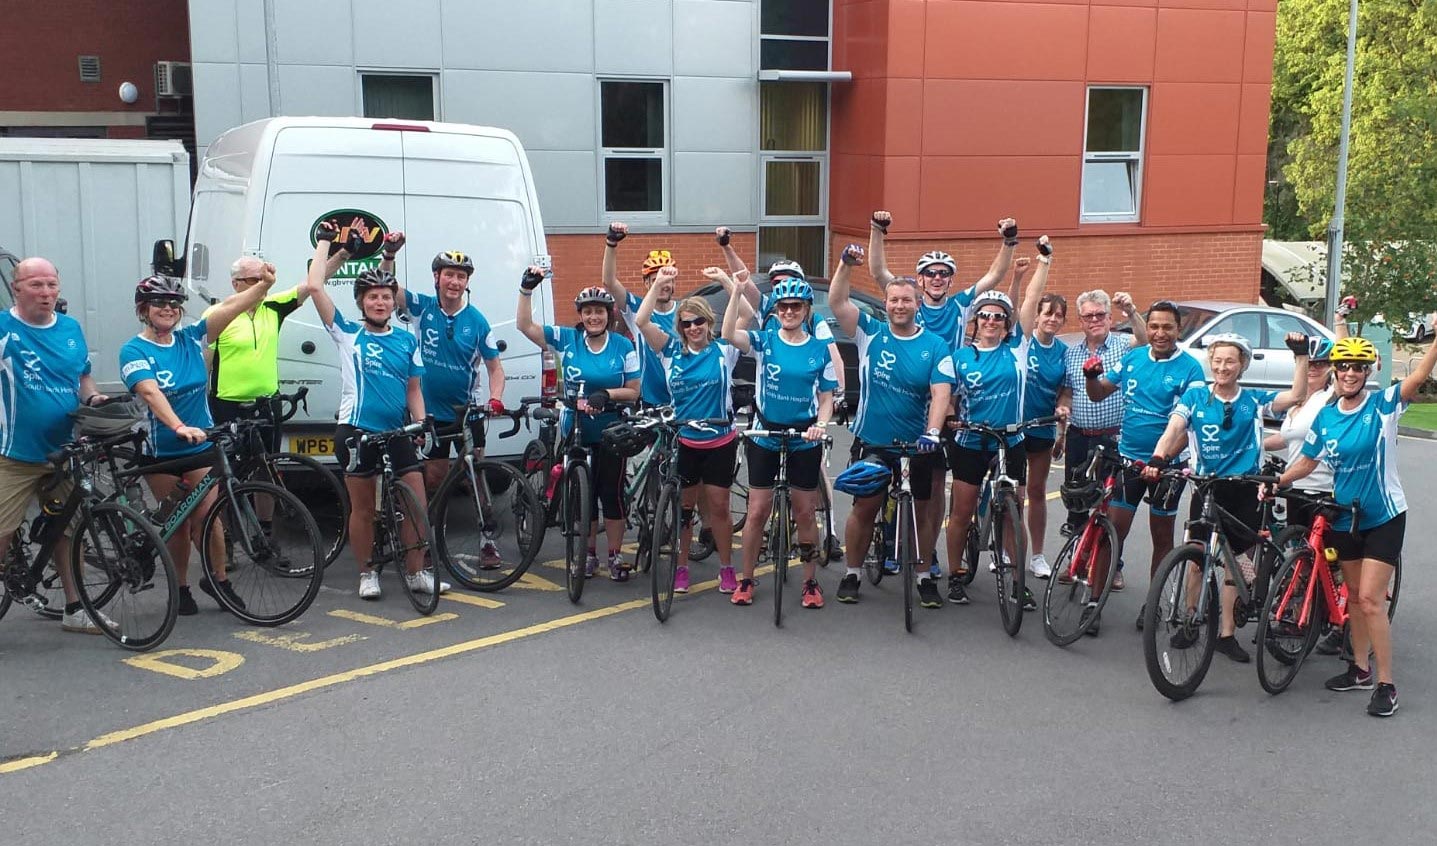 Spire South Bank Hospital cycle over 1,400 miles for charity